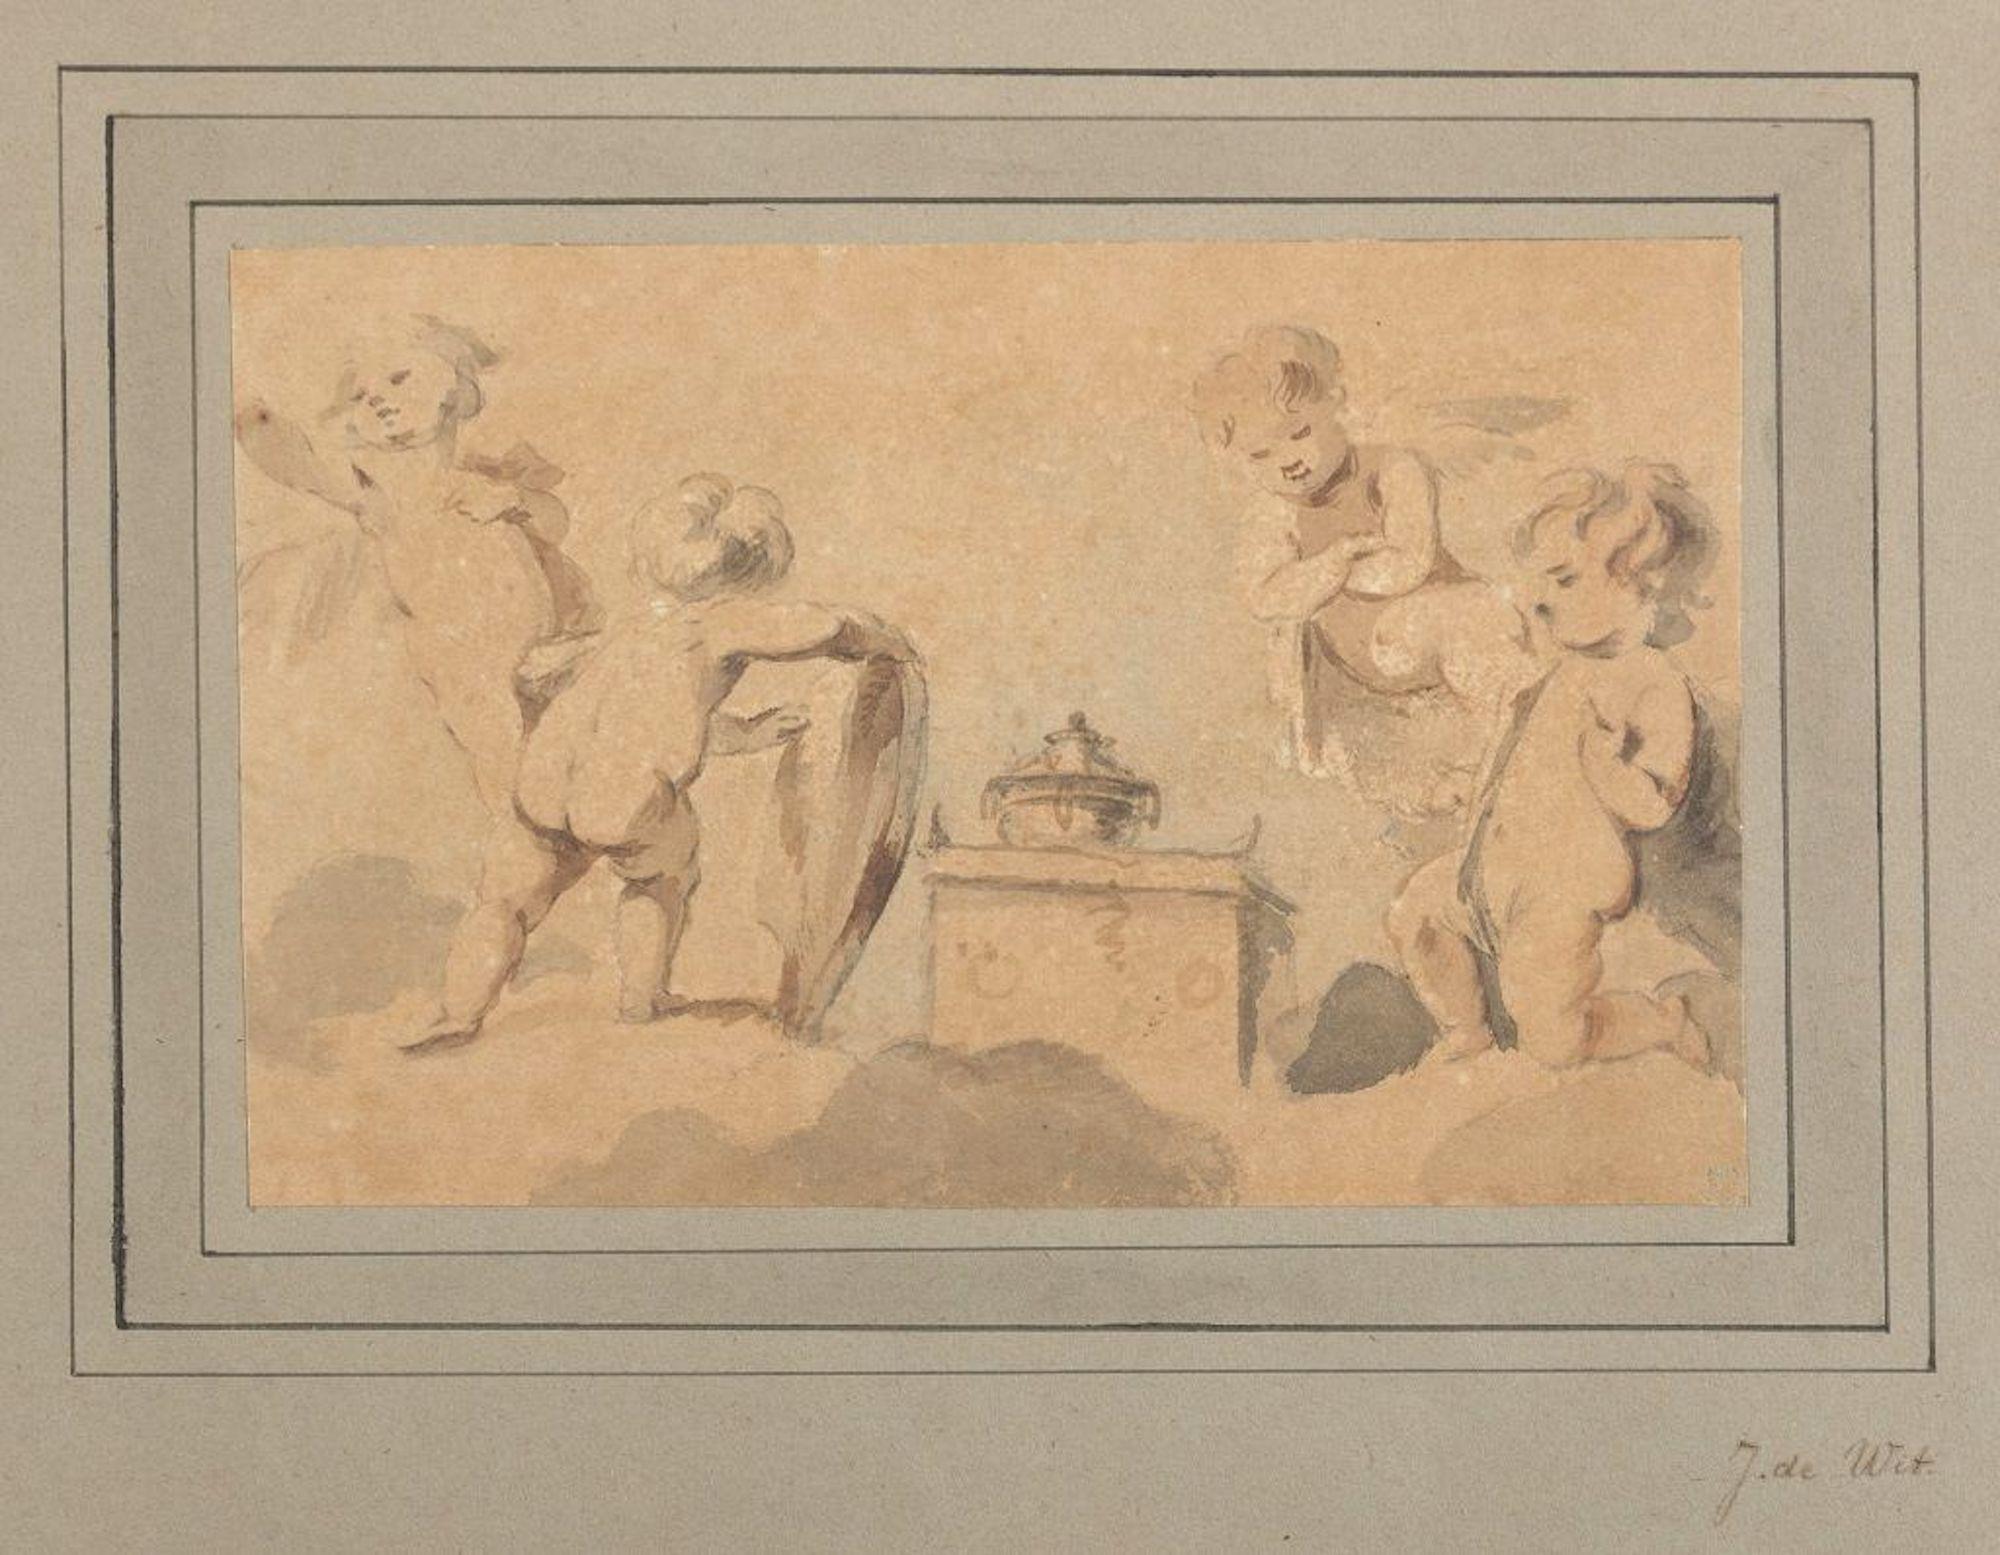 Unknown Figurative Art - Cherubs Around the Altar - Ink and Watercolor on Paper Early 18th Century